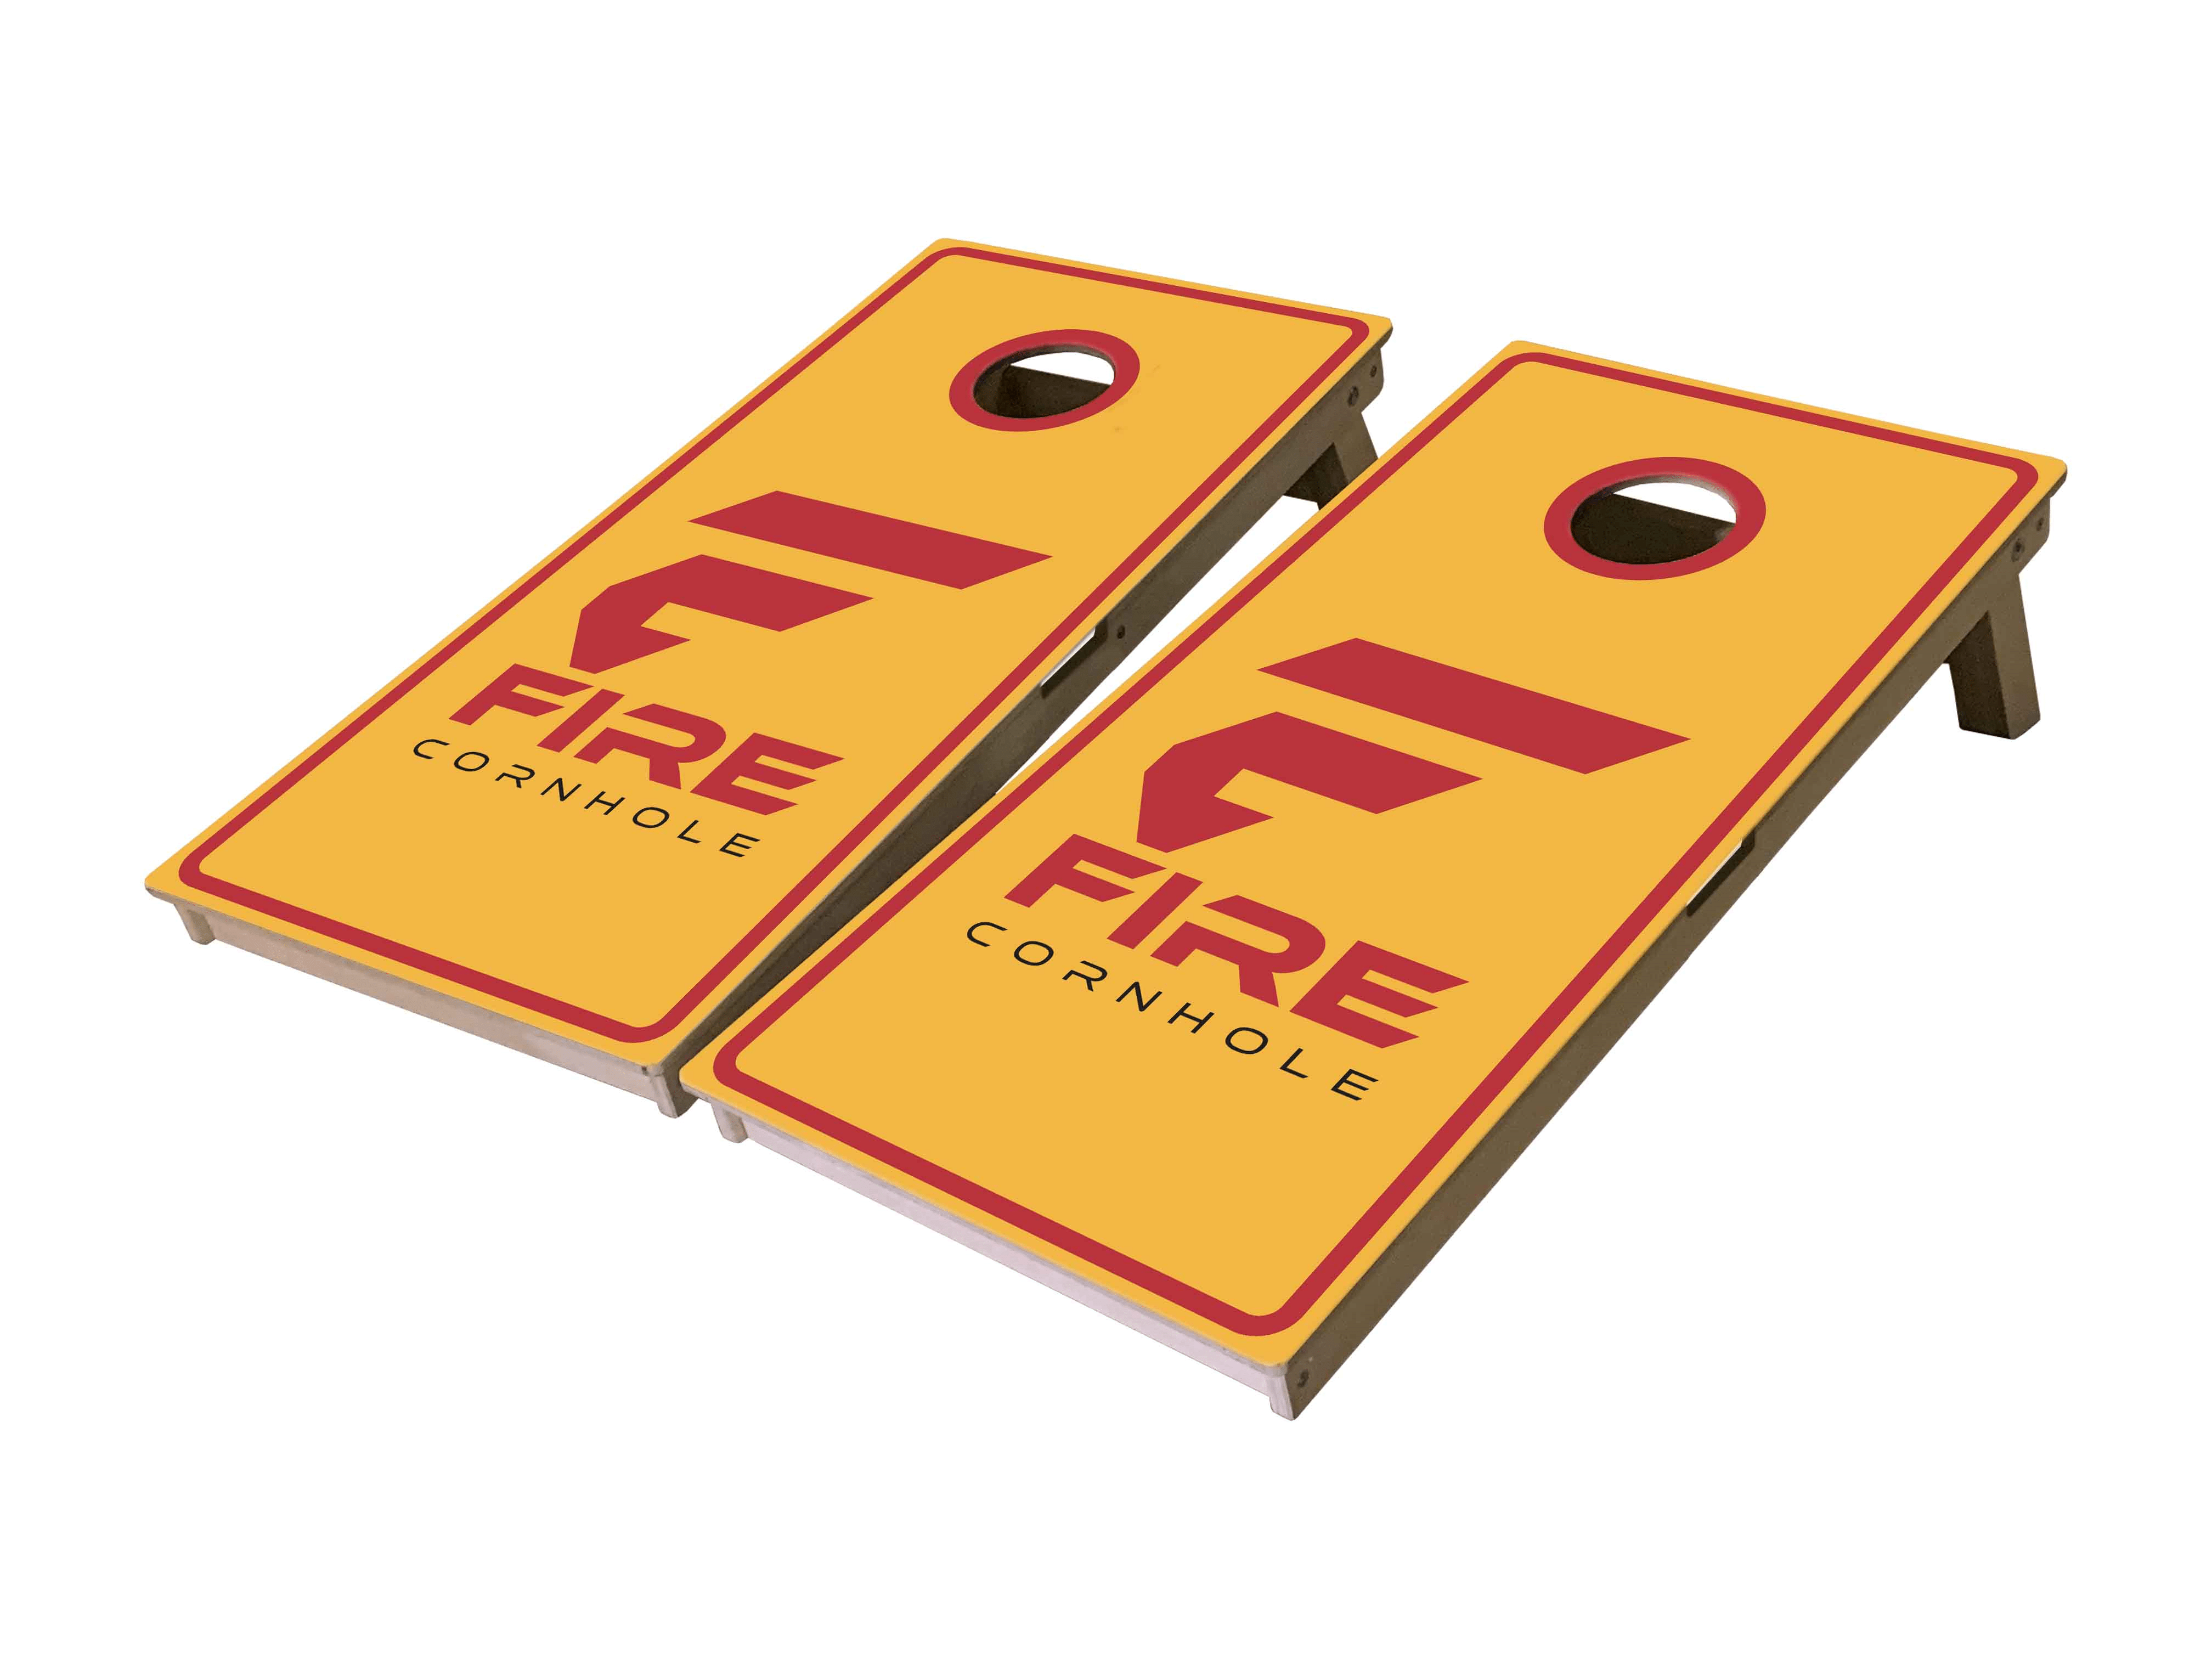 Fire Cornhole boards in yellow and red